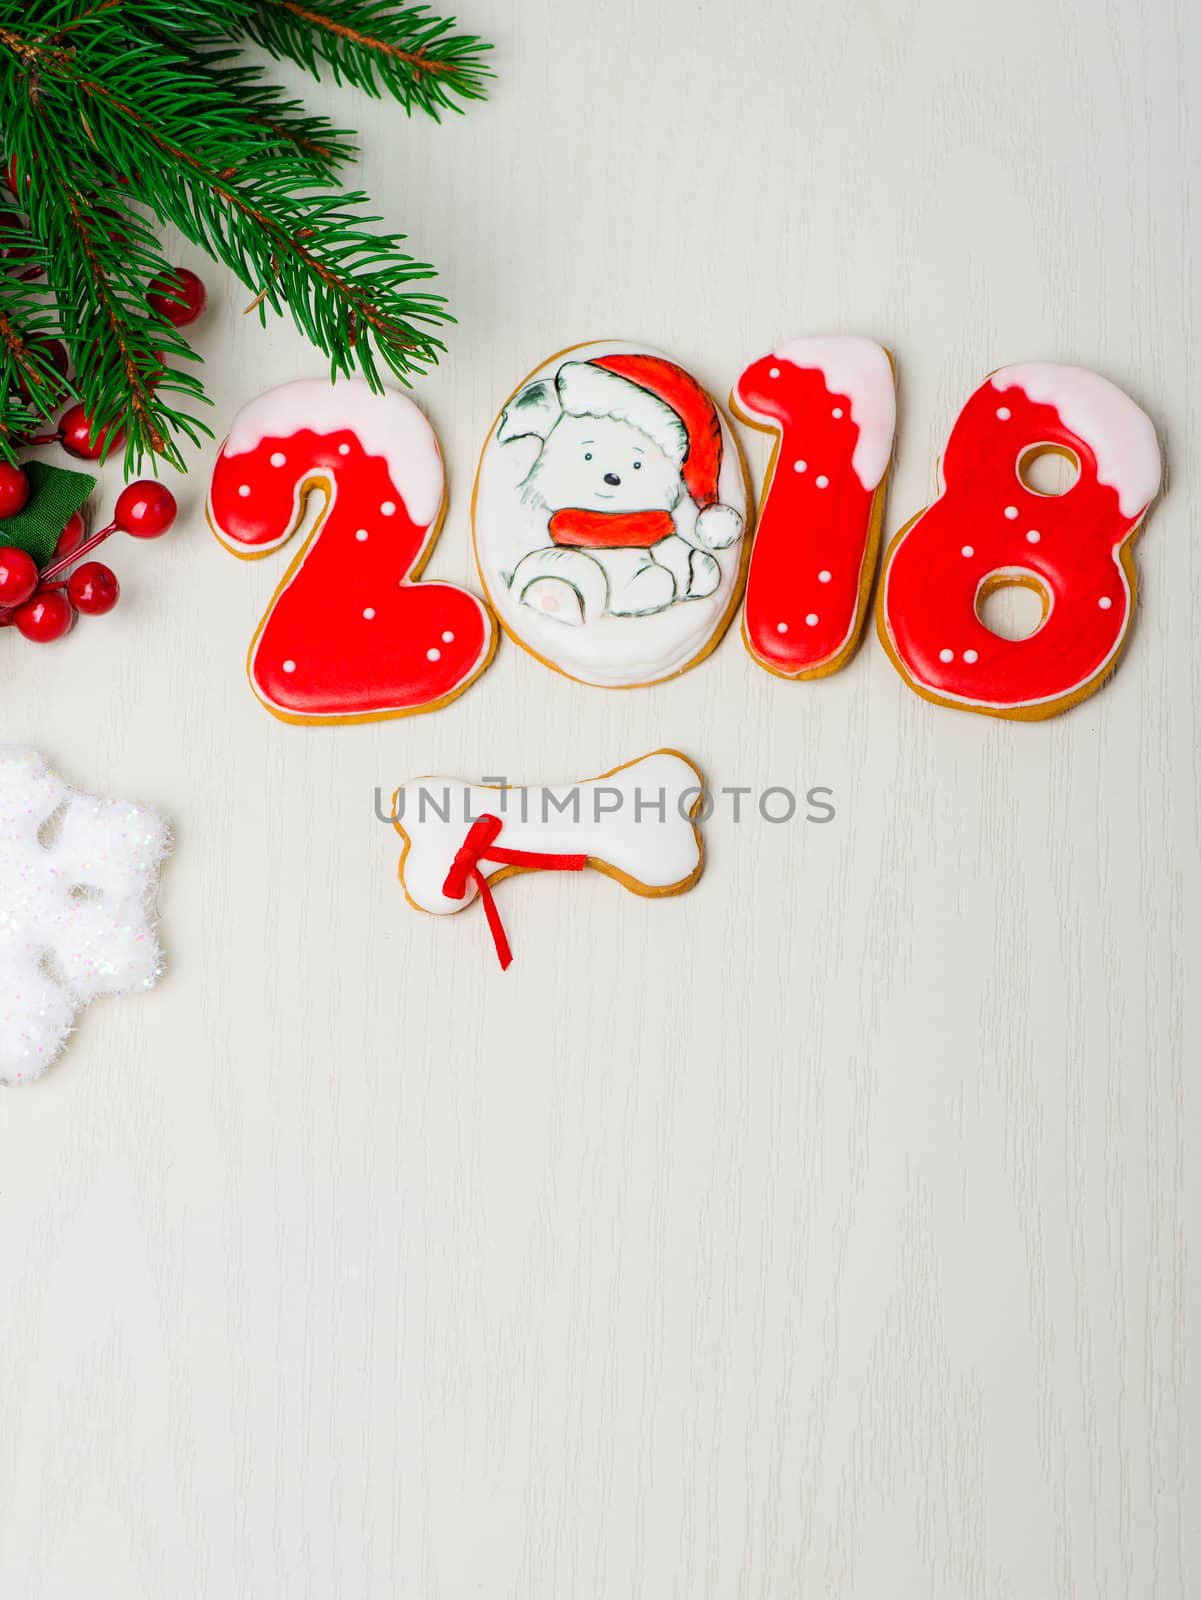 Christmas background with gingerbread, Christmas trees and snowflakes with pine cones. 2018 year of the dog